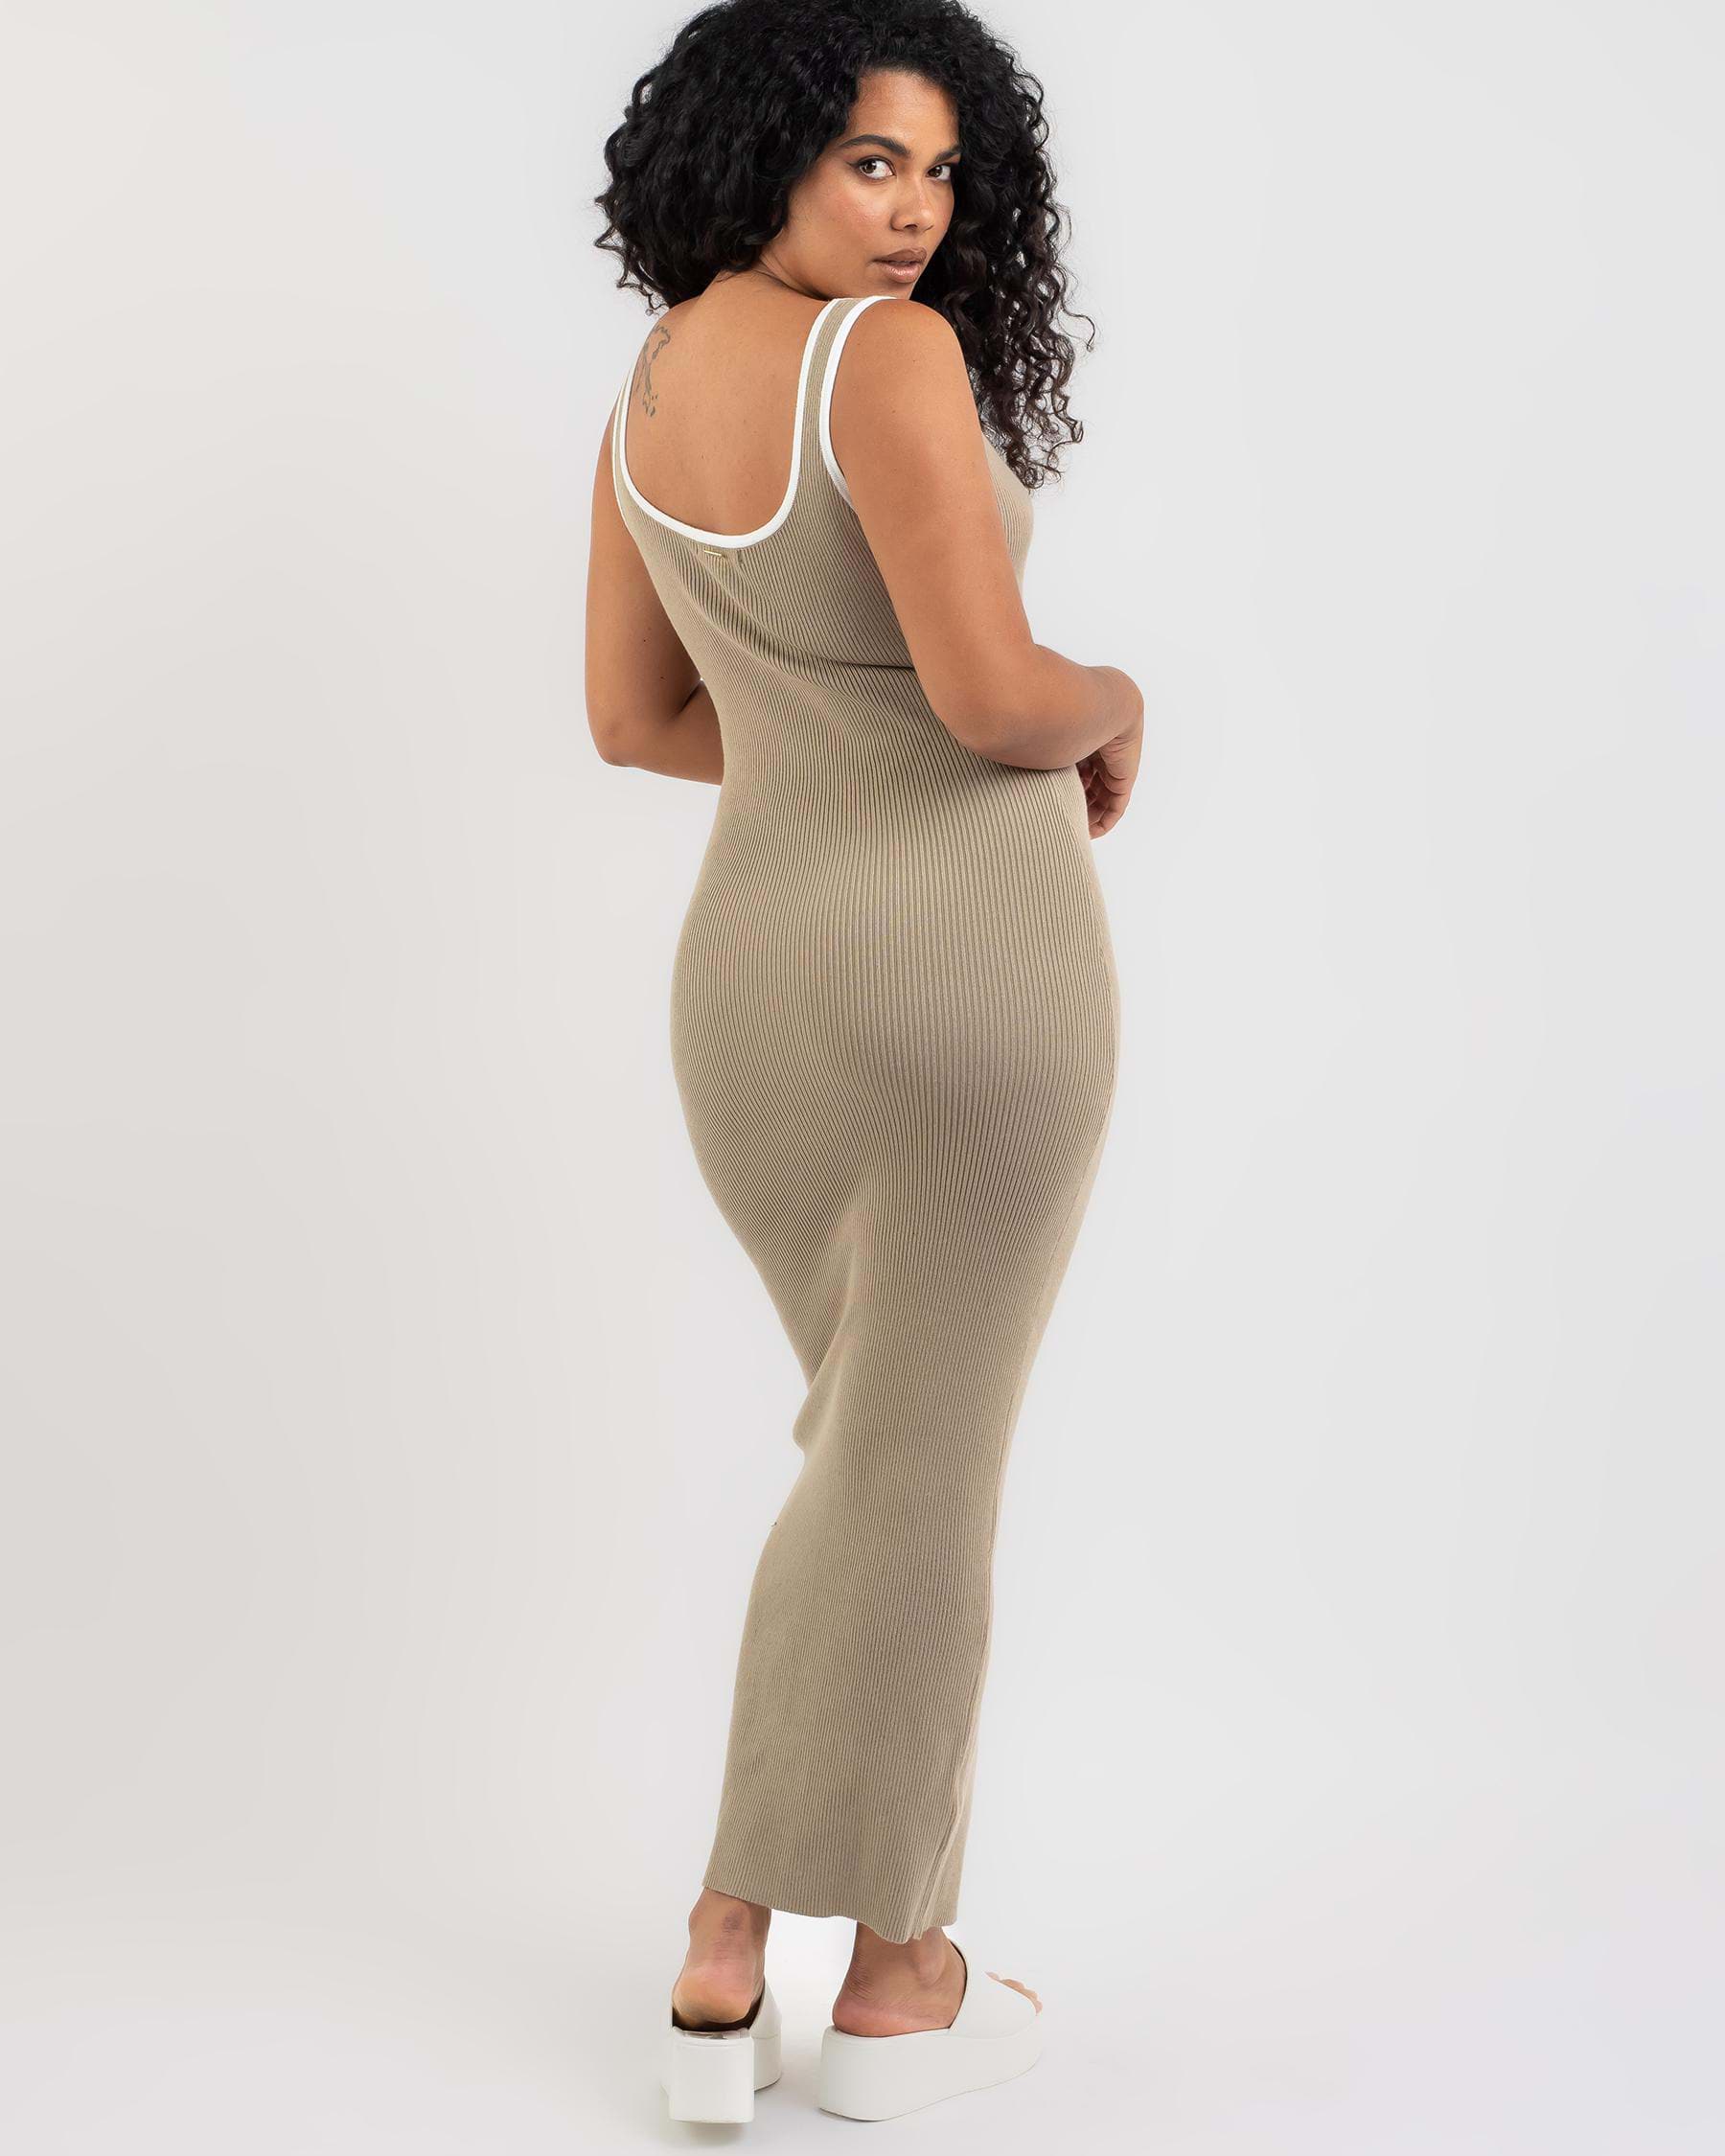 Shop Ava And Ever Gemma Maxi Dress In Tan - Fast Shipping & Easy ...